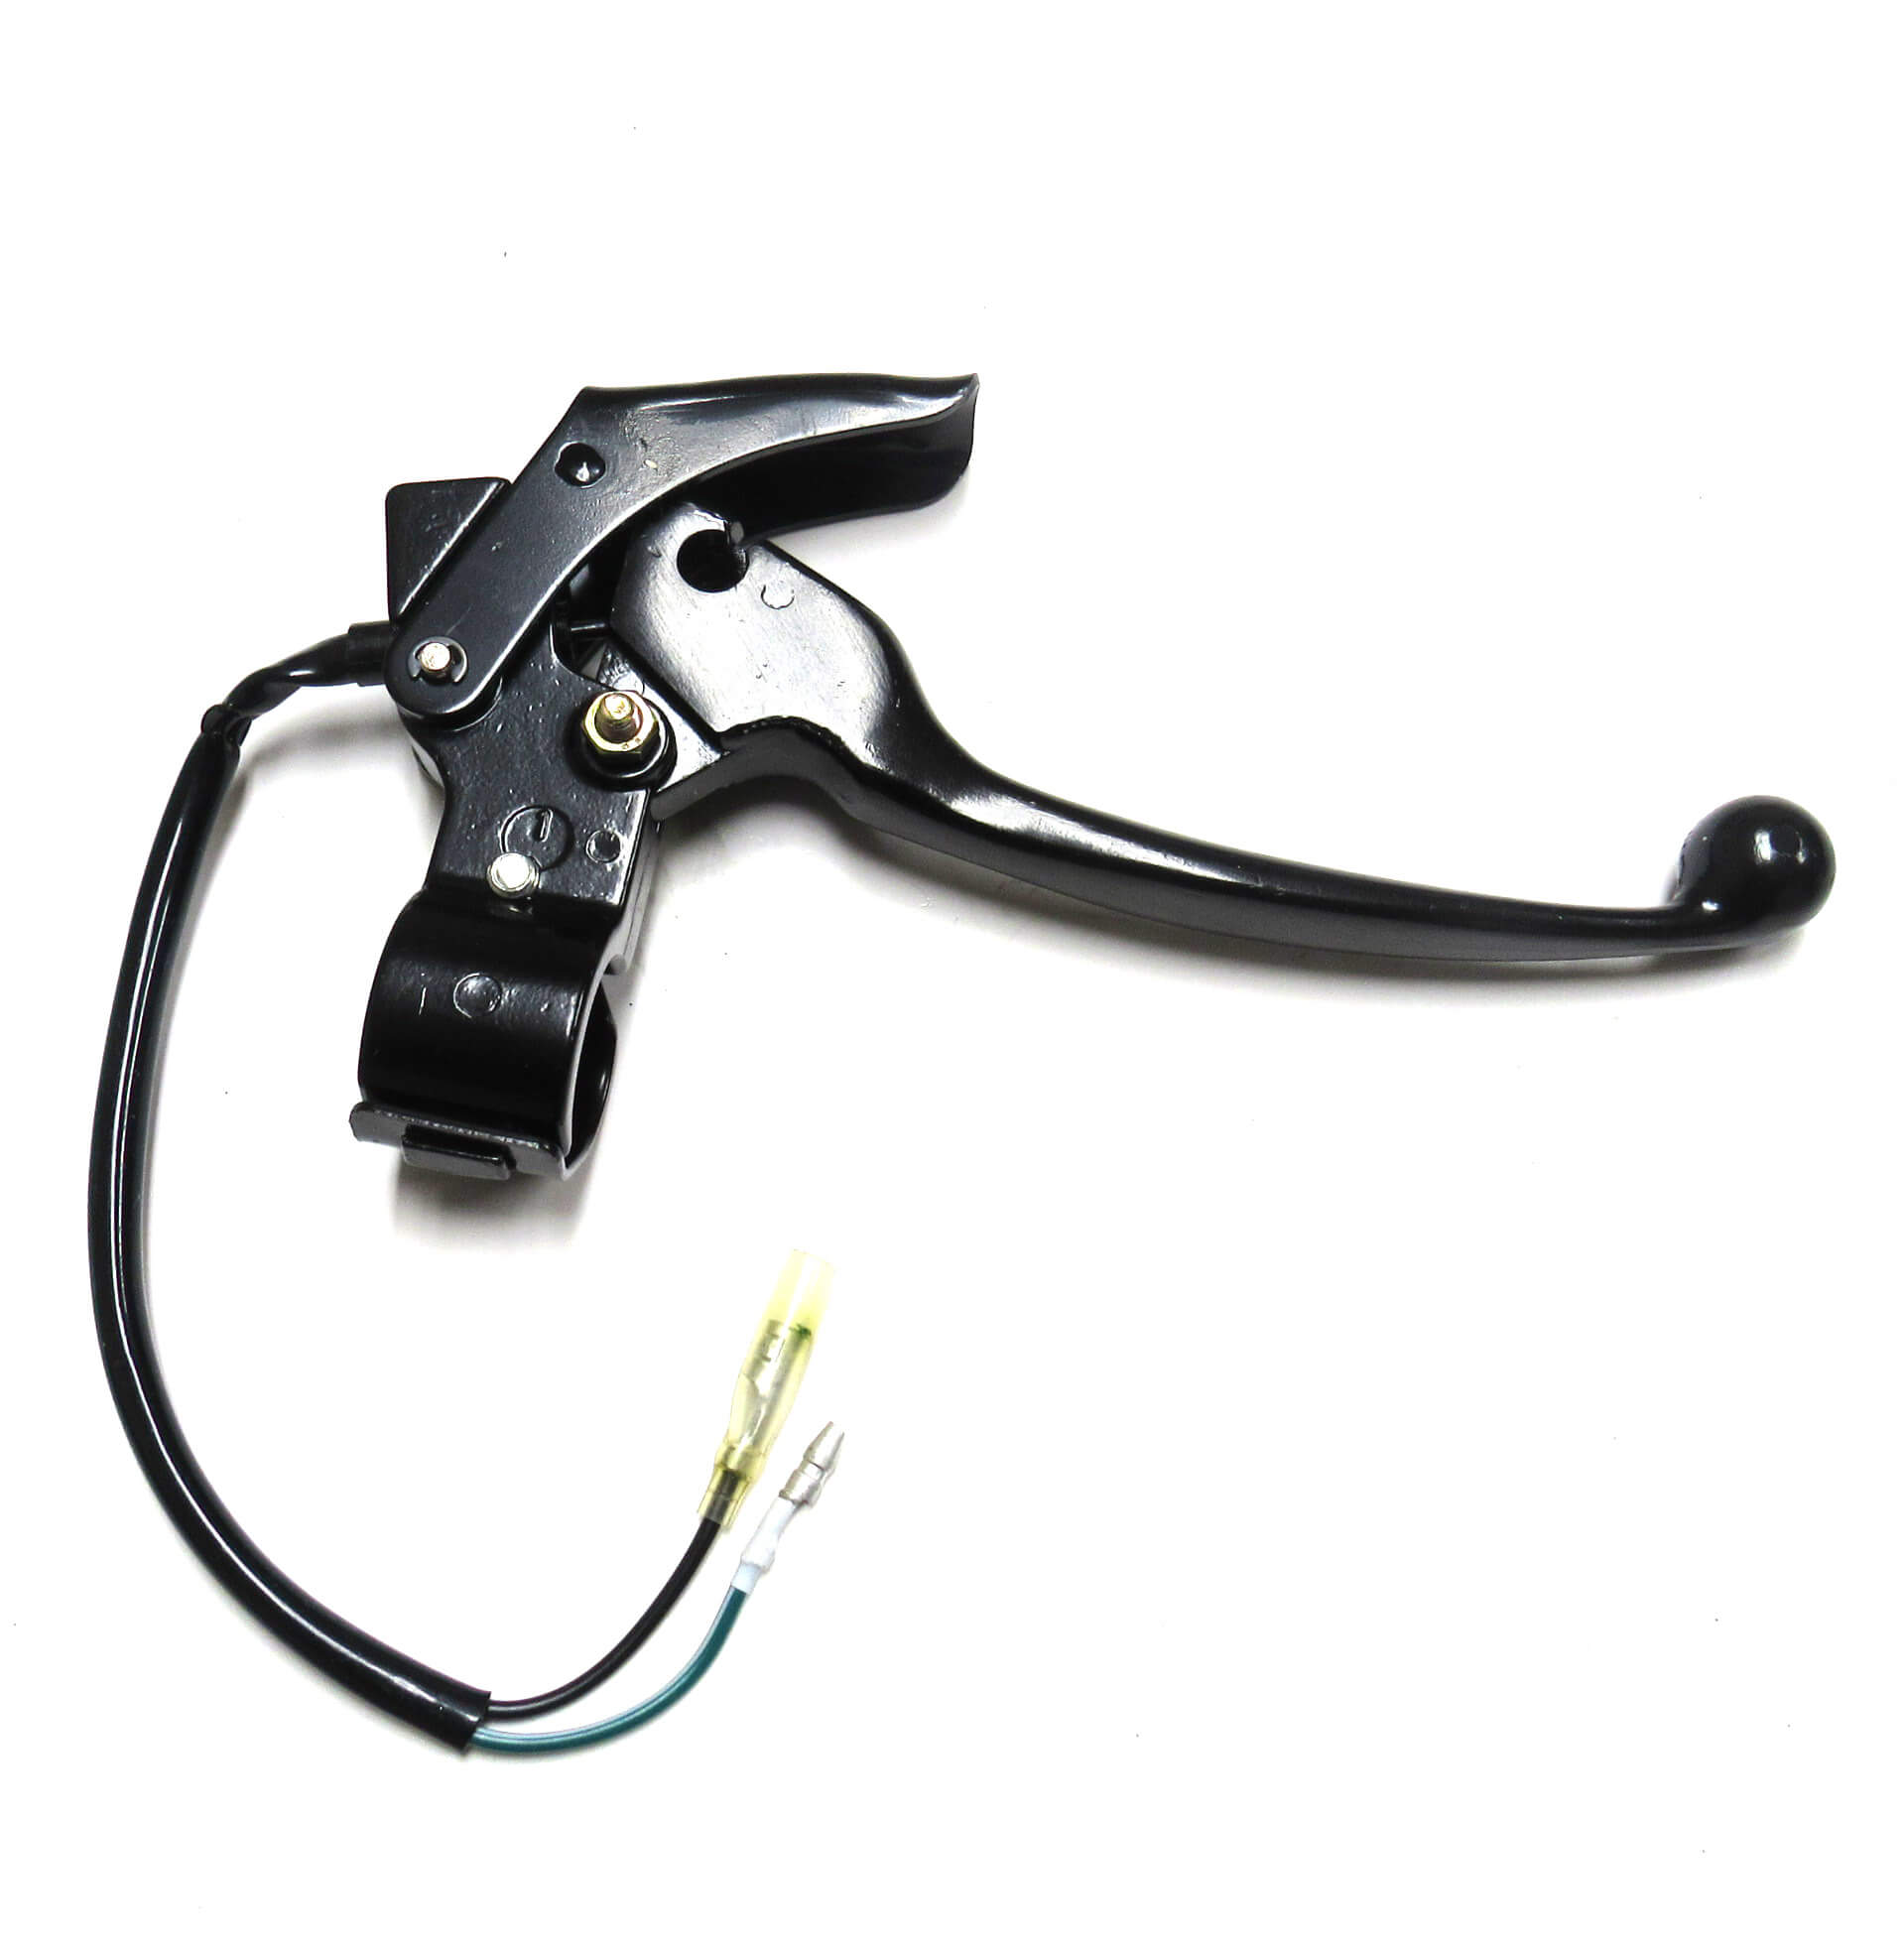 Left Hand Brake Lever Assembly Fits ATVs, Dirt Bikes, Scooters